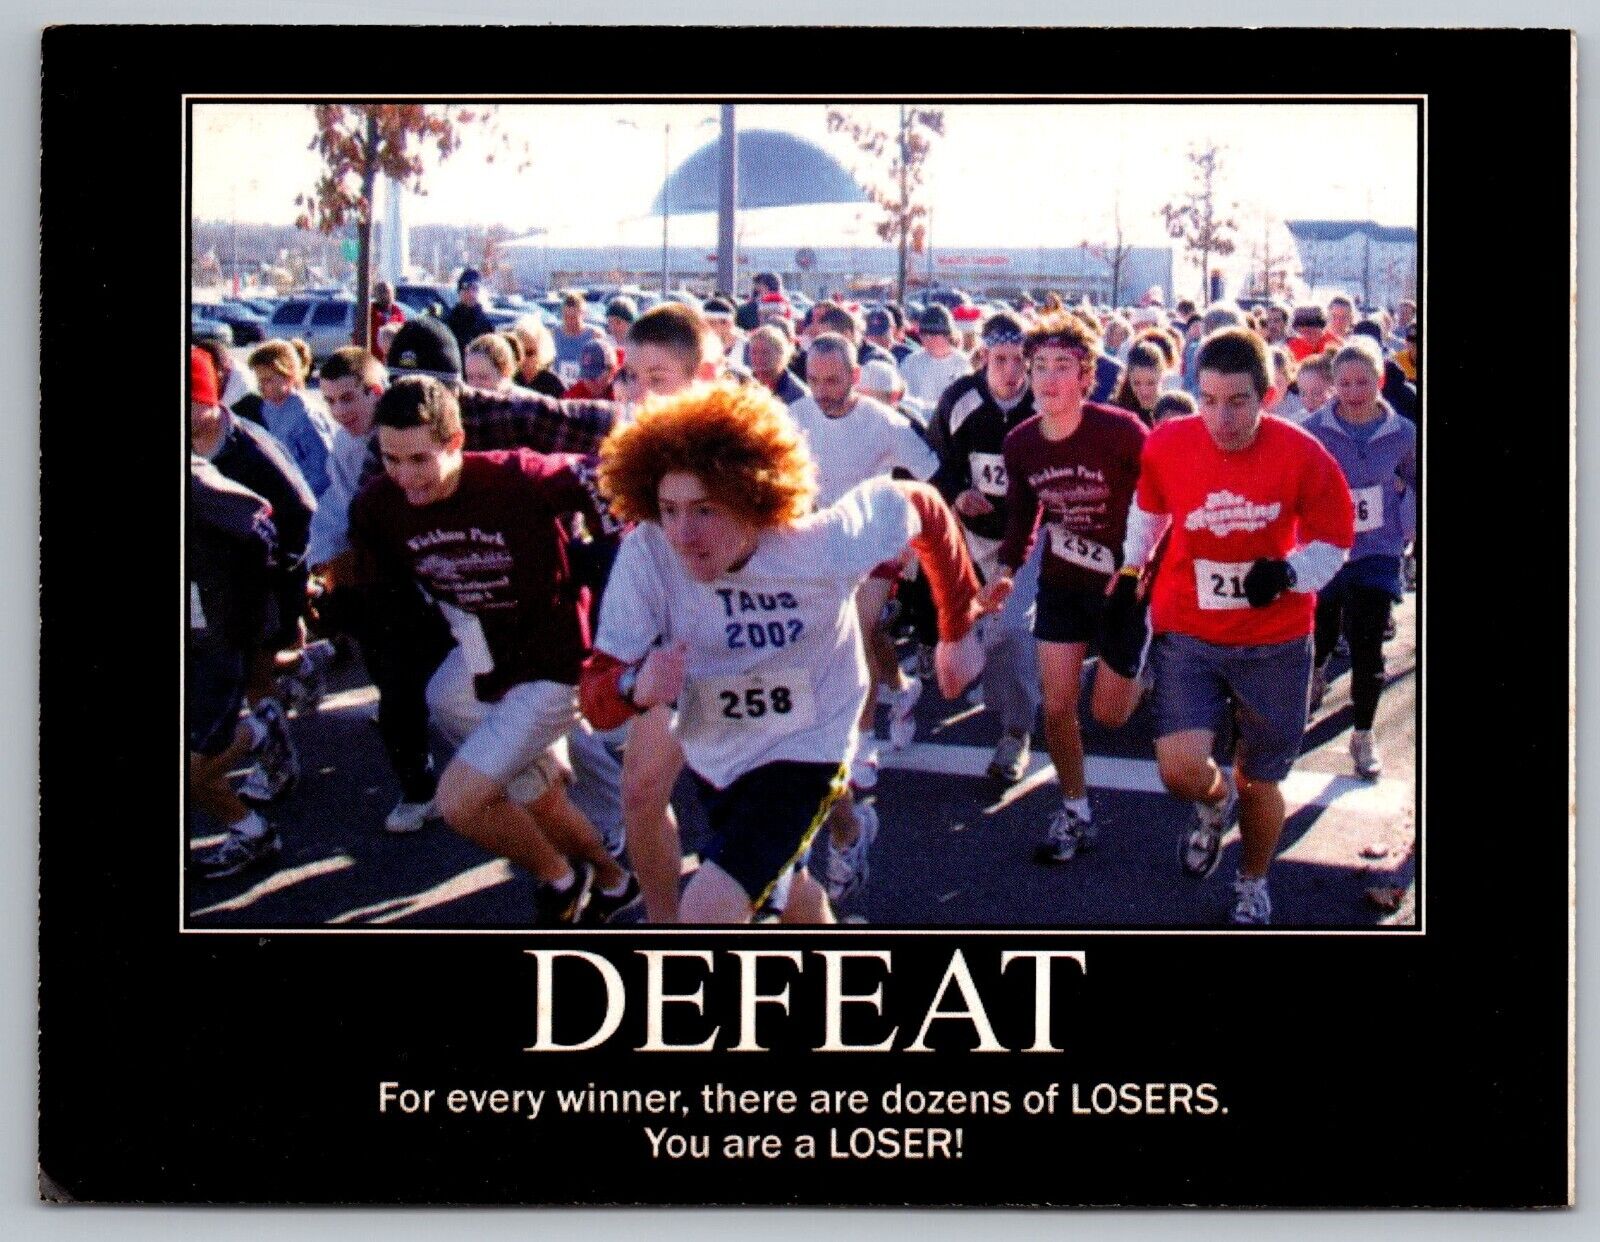 Demotivational unused postcard about defeat. Showing the reality of competition.